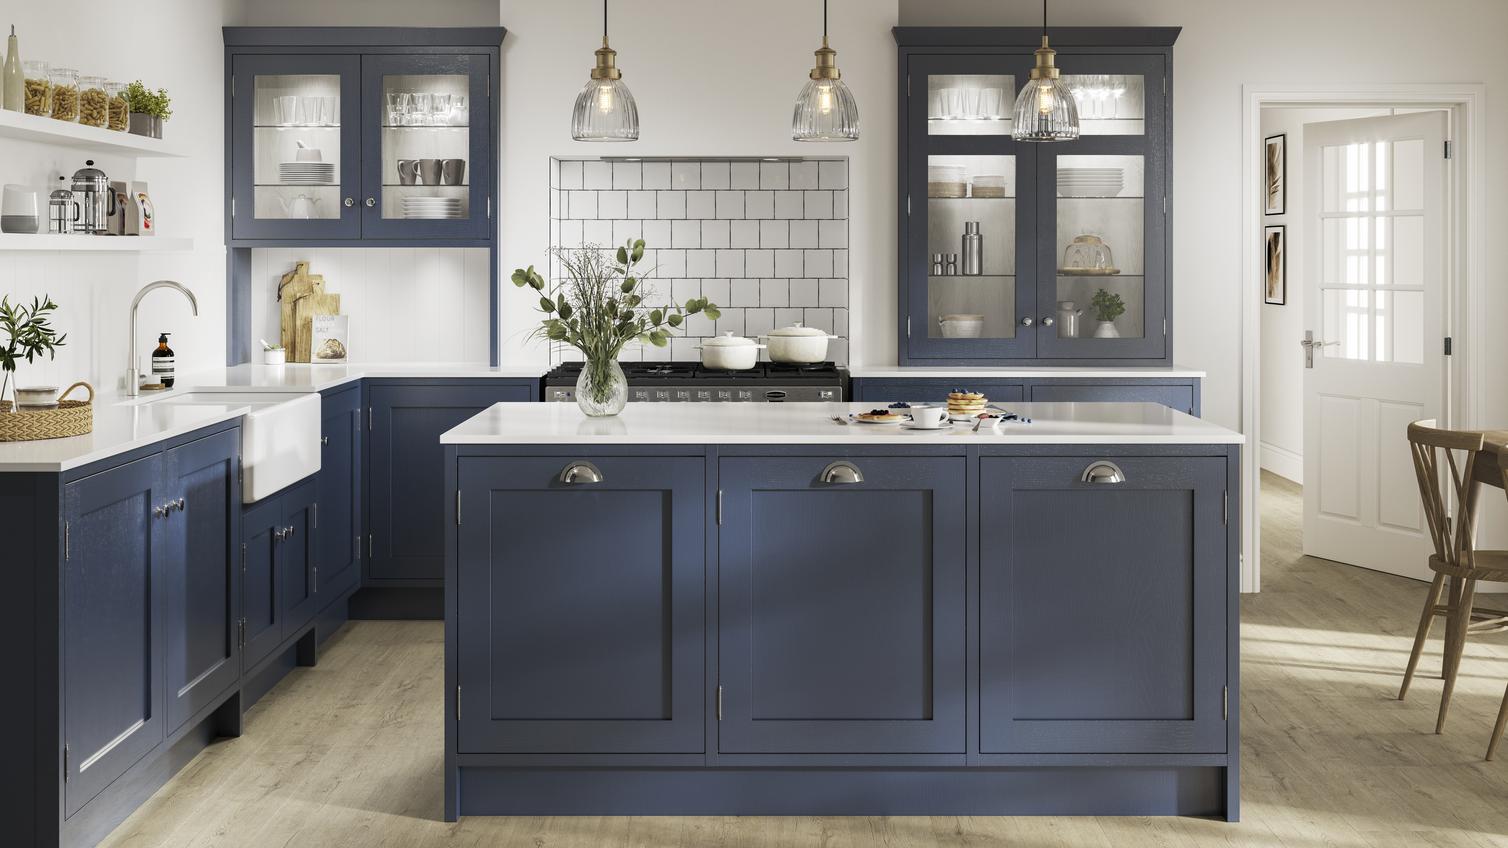 Navy blue shaker kitchen with in-frame profiles in an island layout. Has white worktops, knurled handles, and glass units.